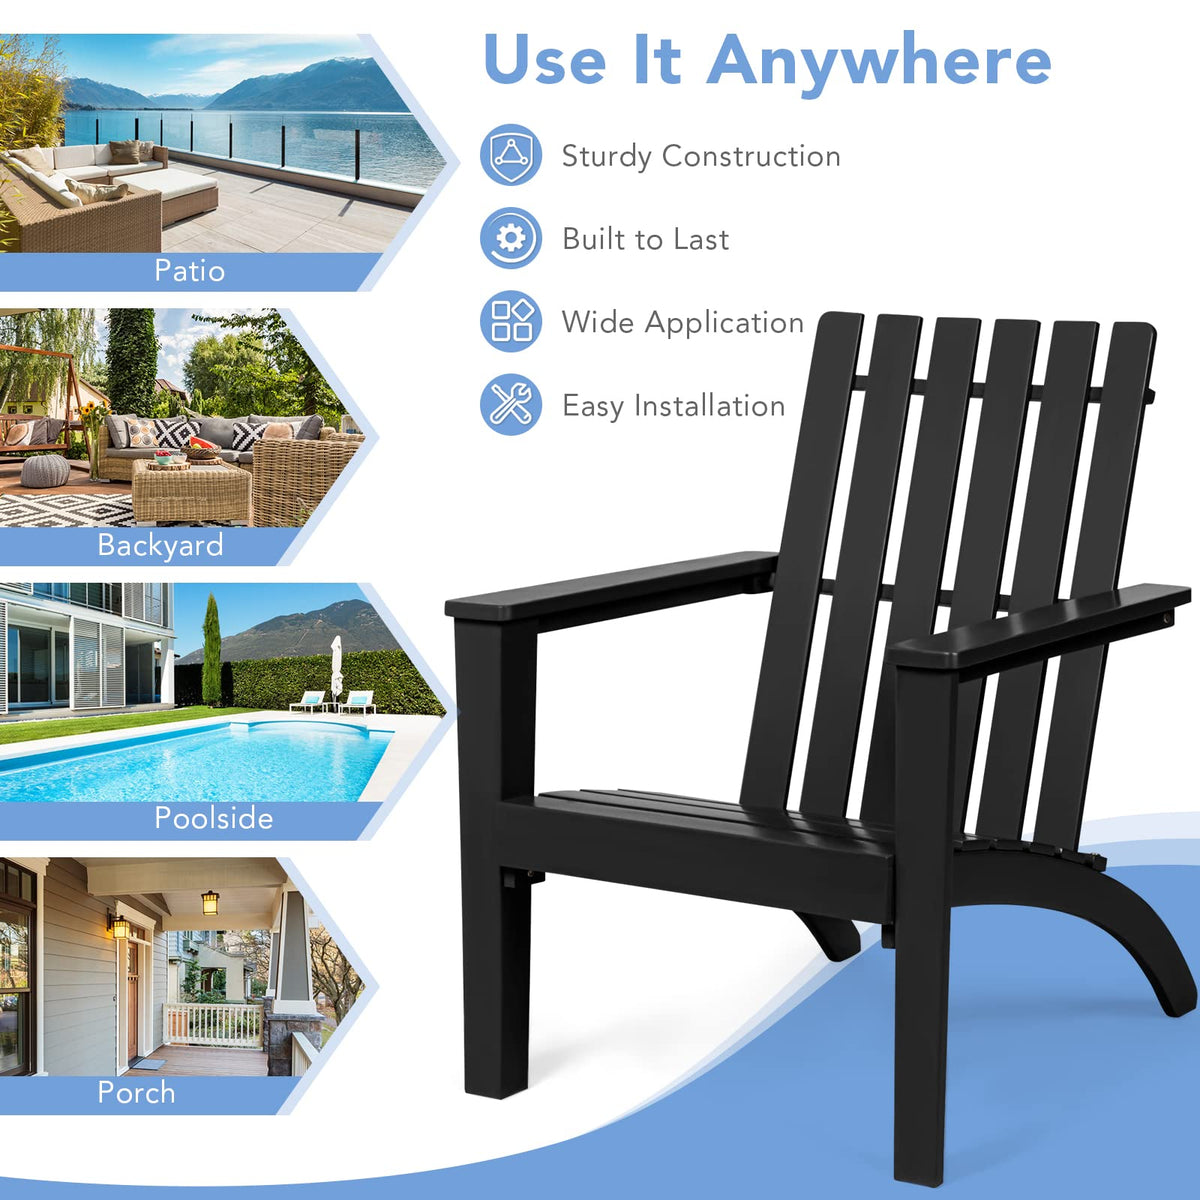 Patio Lounge Chair with Ergonomic Backrest and Armrest